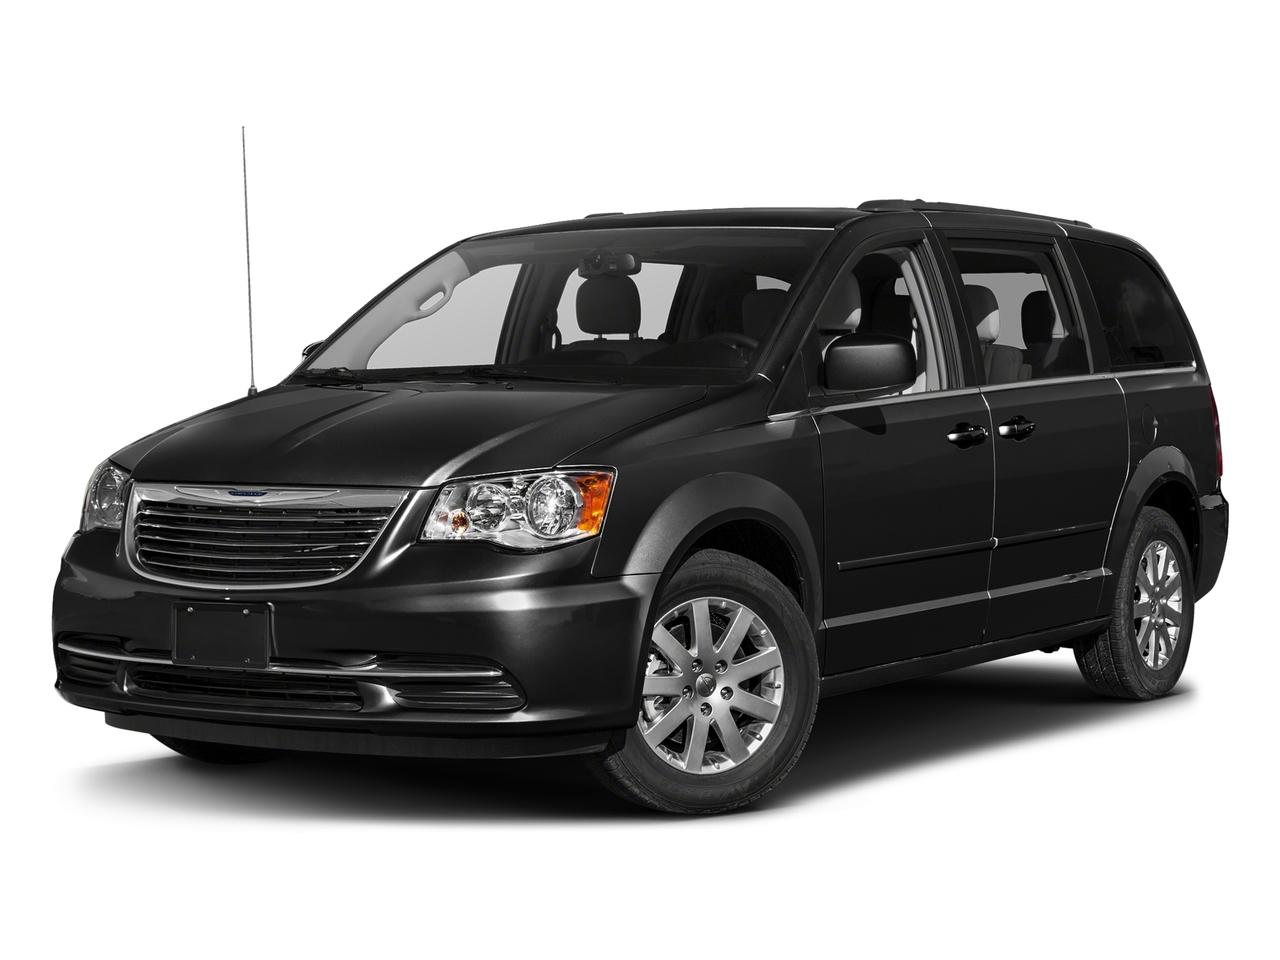 2016 Chrysler Town & Country Vehicle Photo in Saint Charles, IL 60174